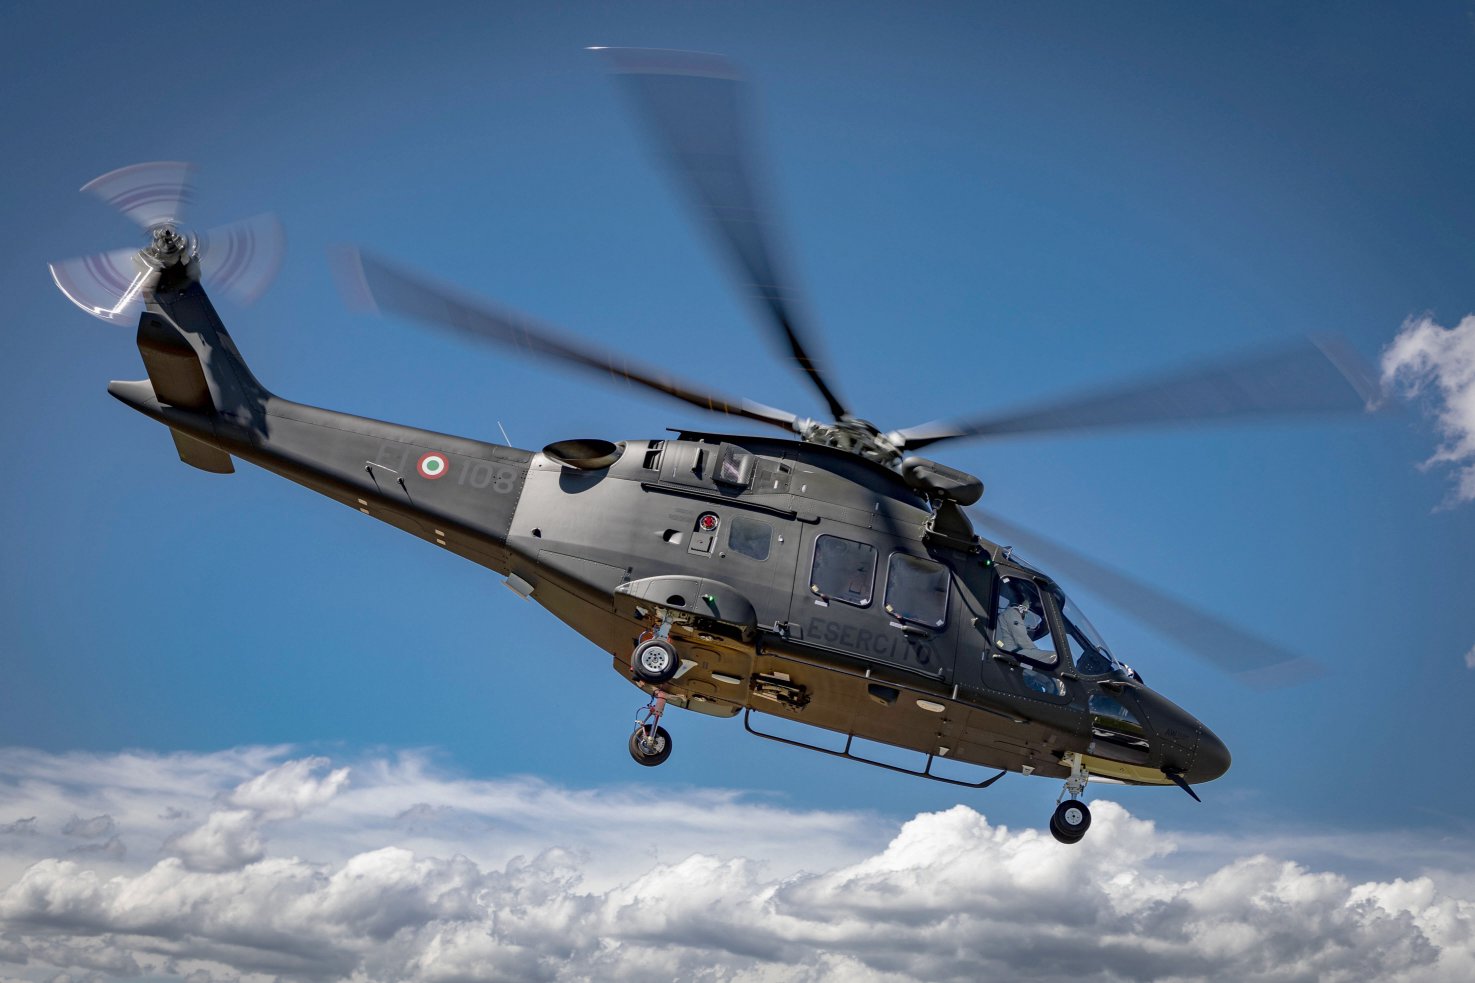 With Austria recently selecting the Italian-built AW169M, both nations are now looking to co-operate on future helicopter procurements through an LOI signed on 12 November. (Bundesheer Fotos)